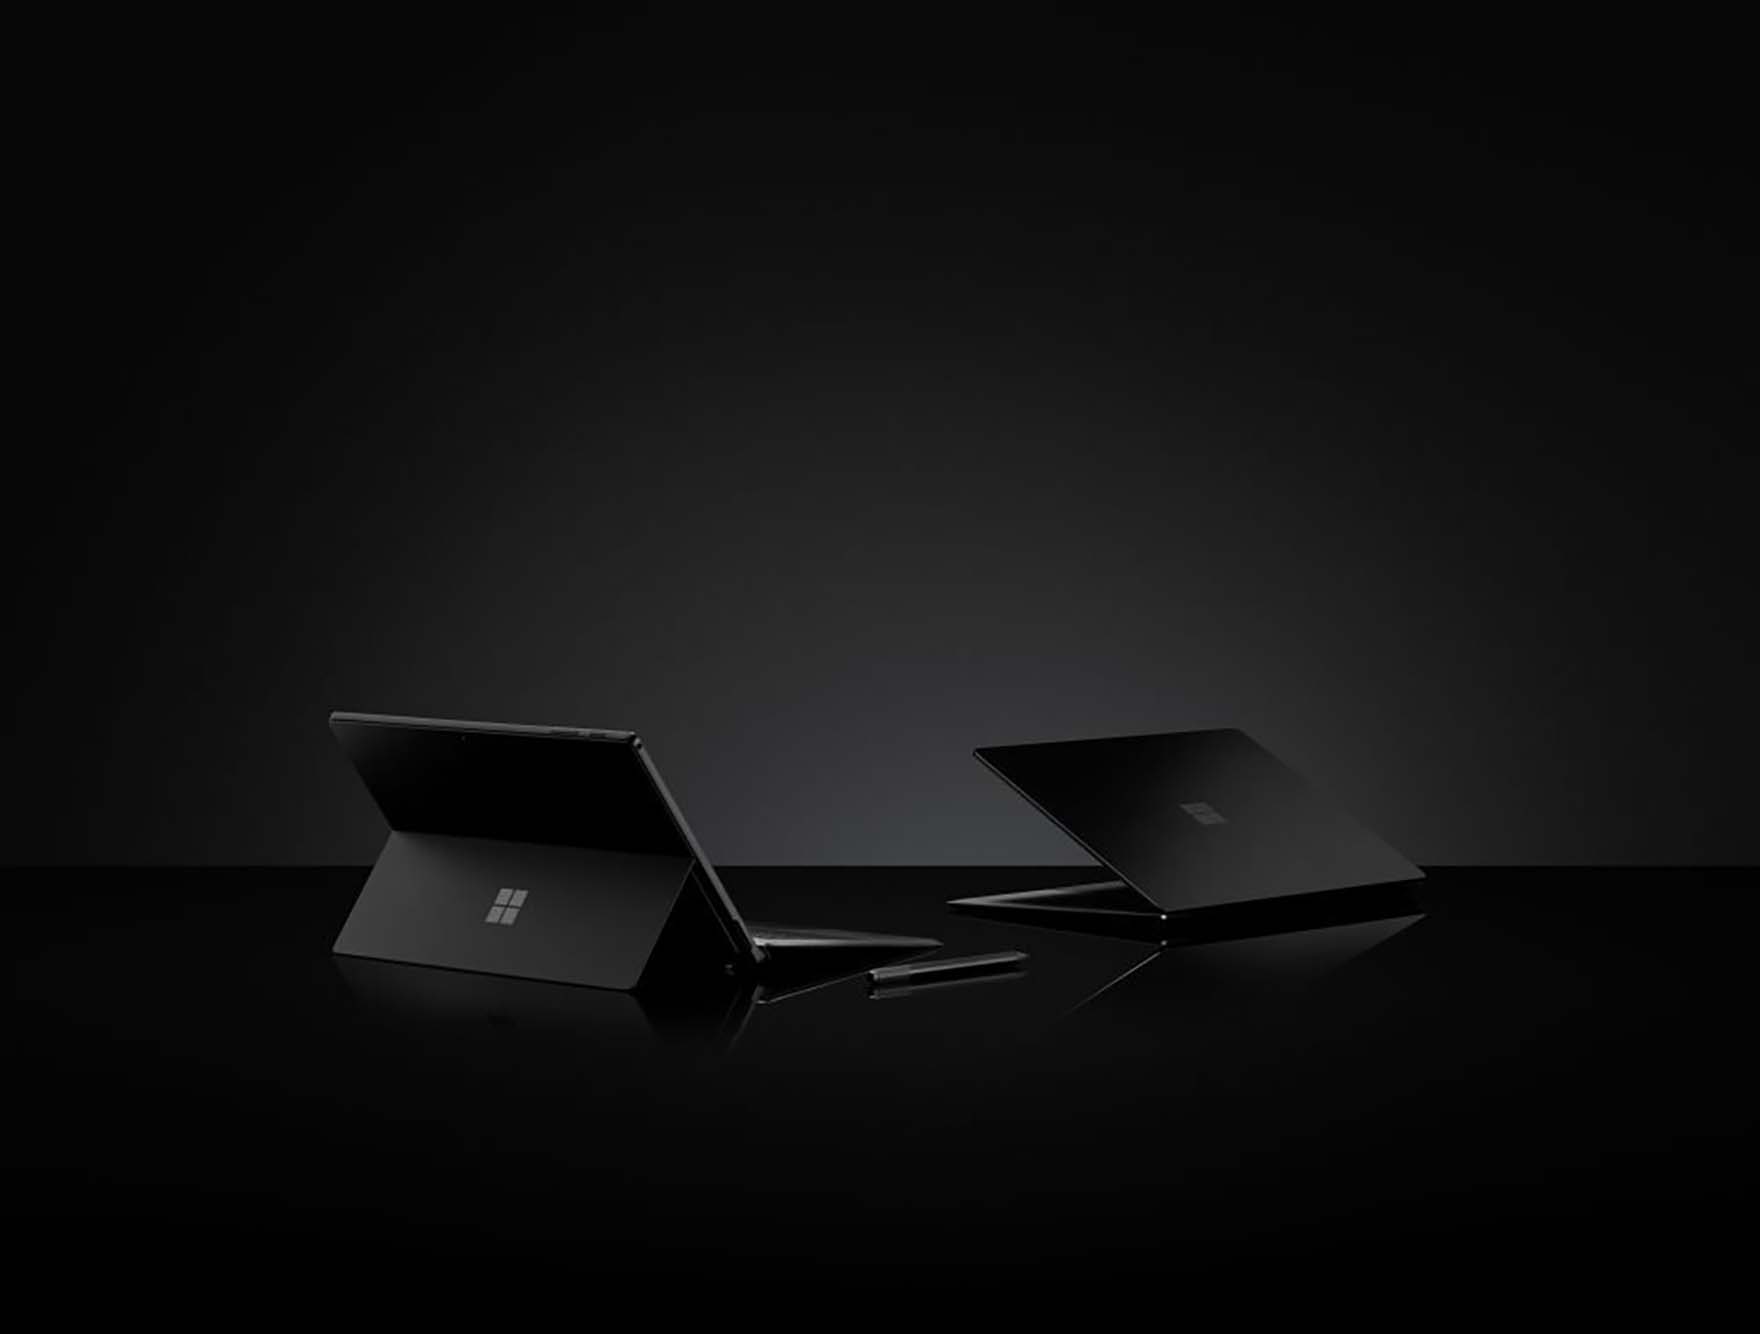 Suface pro and surface laptop against a dark background